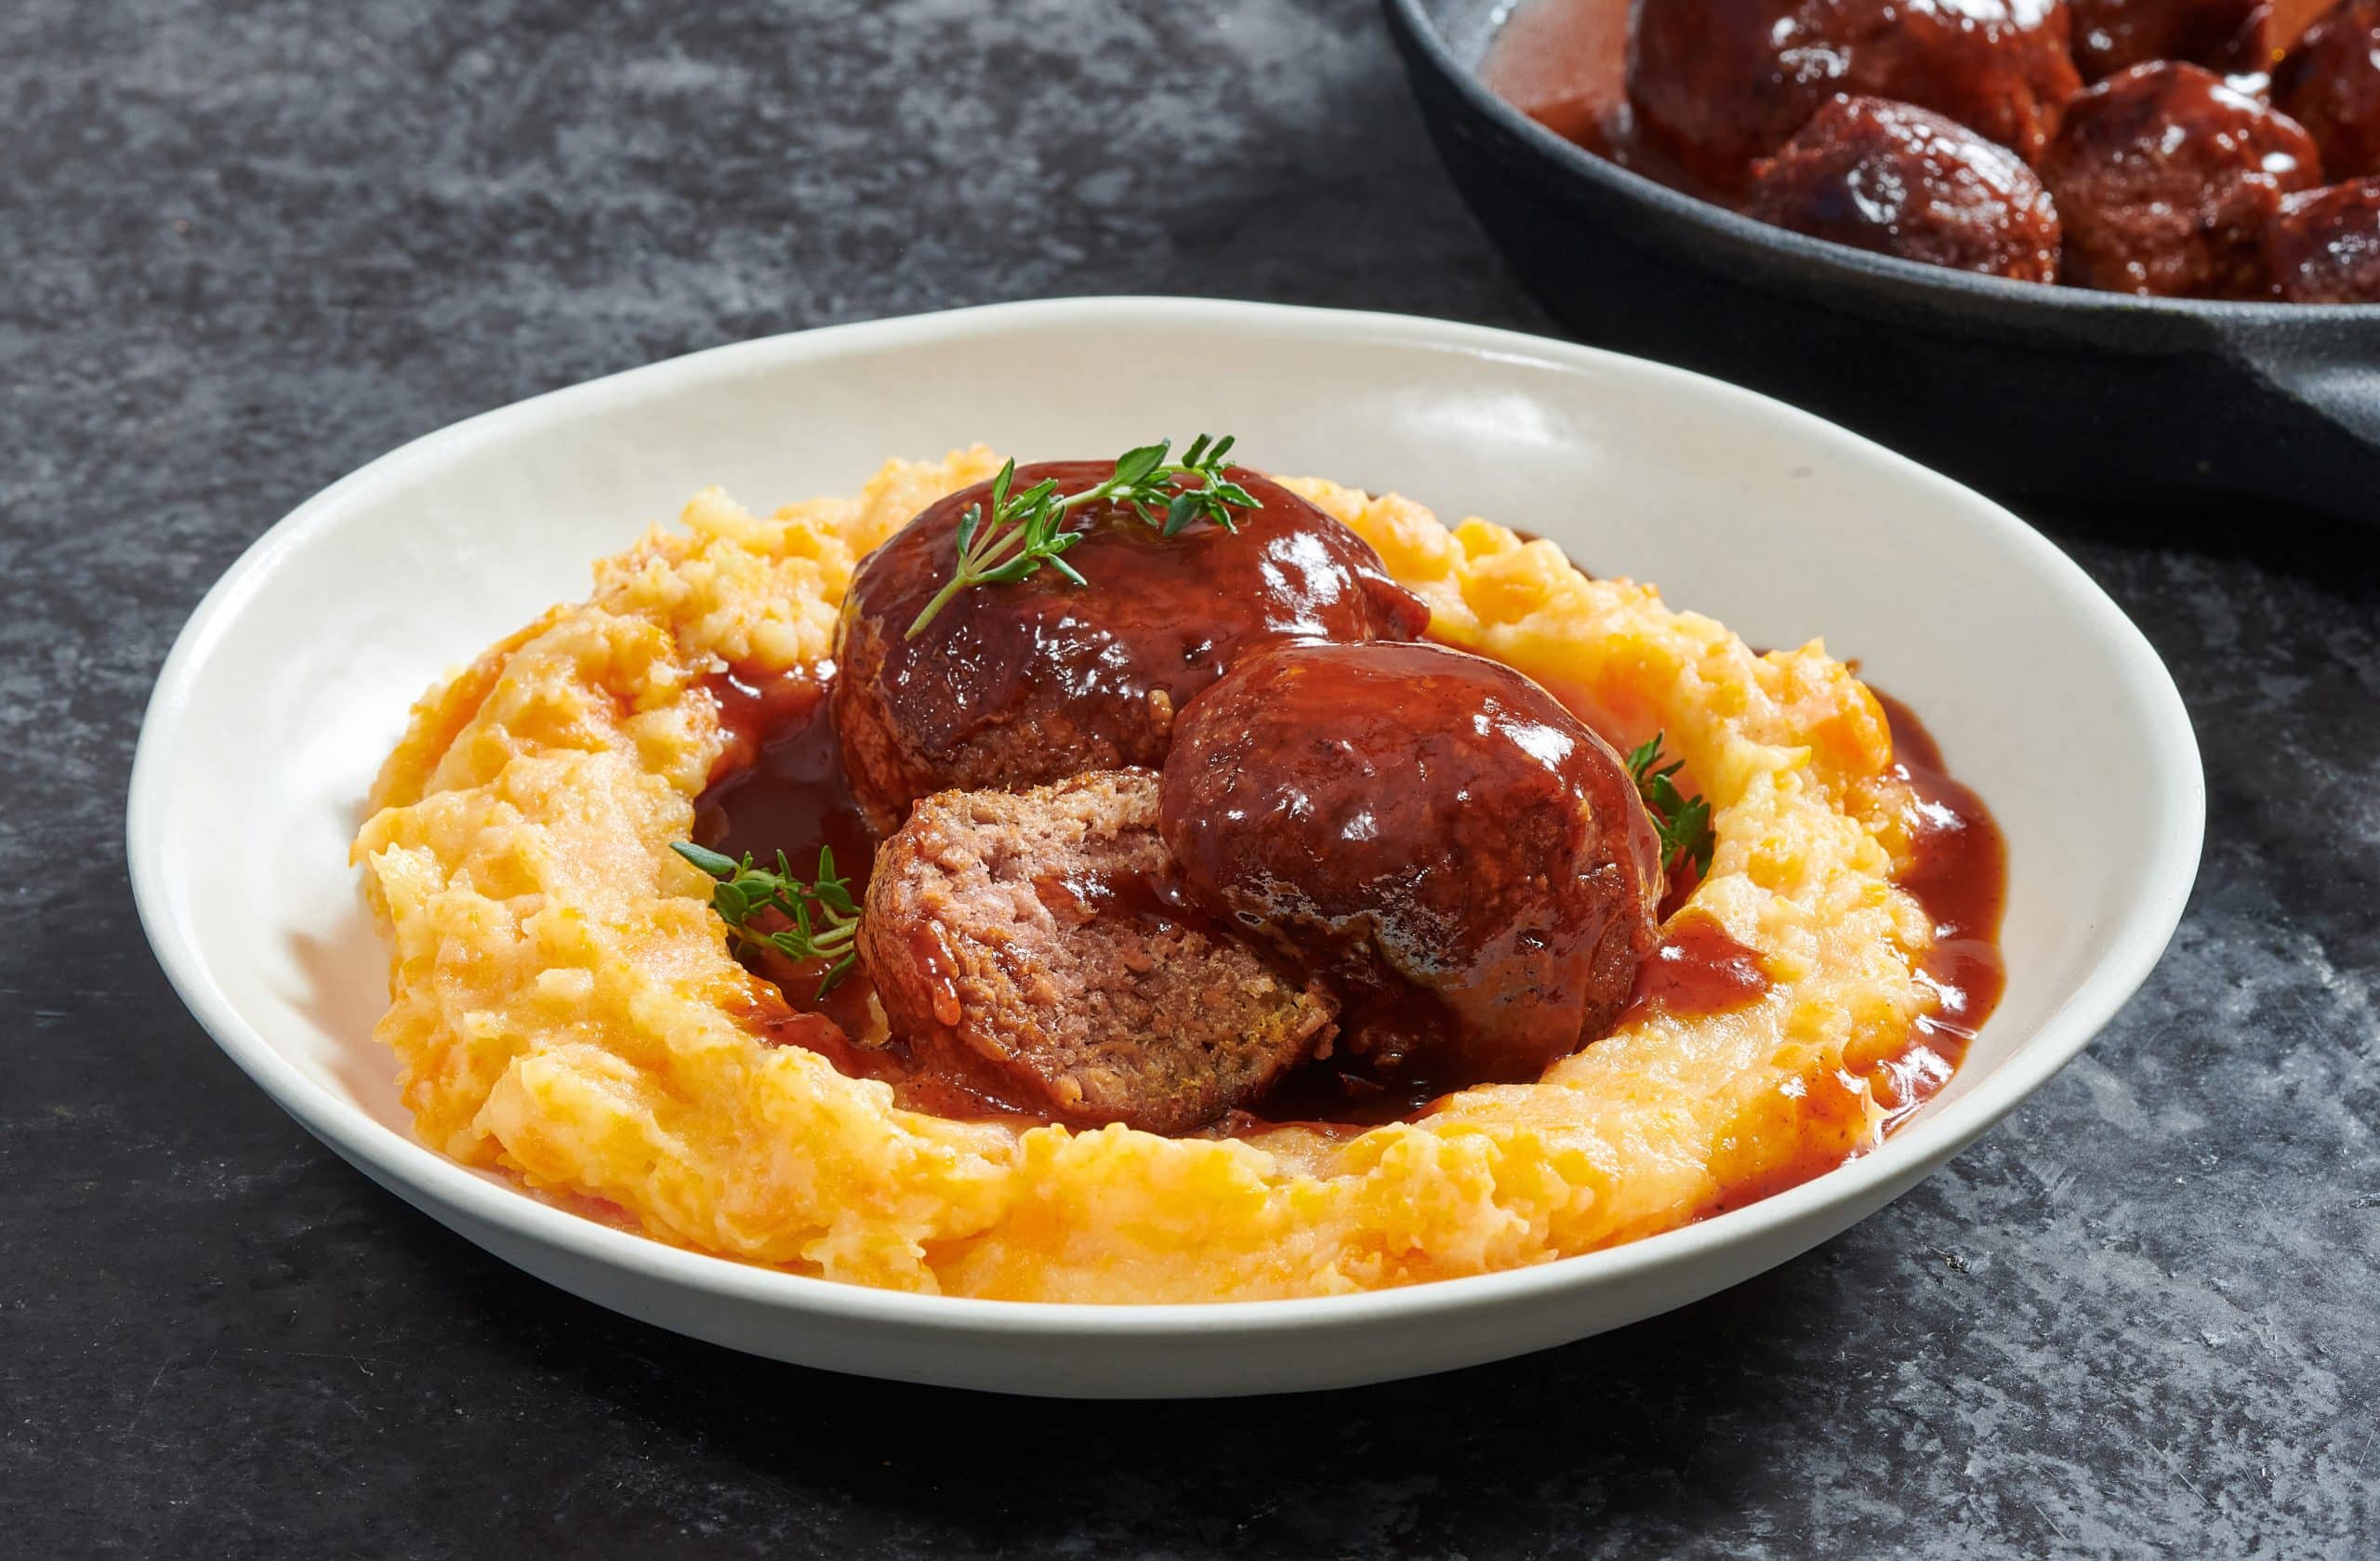 New Meatballs on Puree With Brown Sauce and Thyme